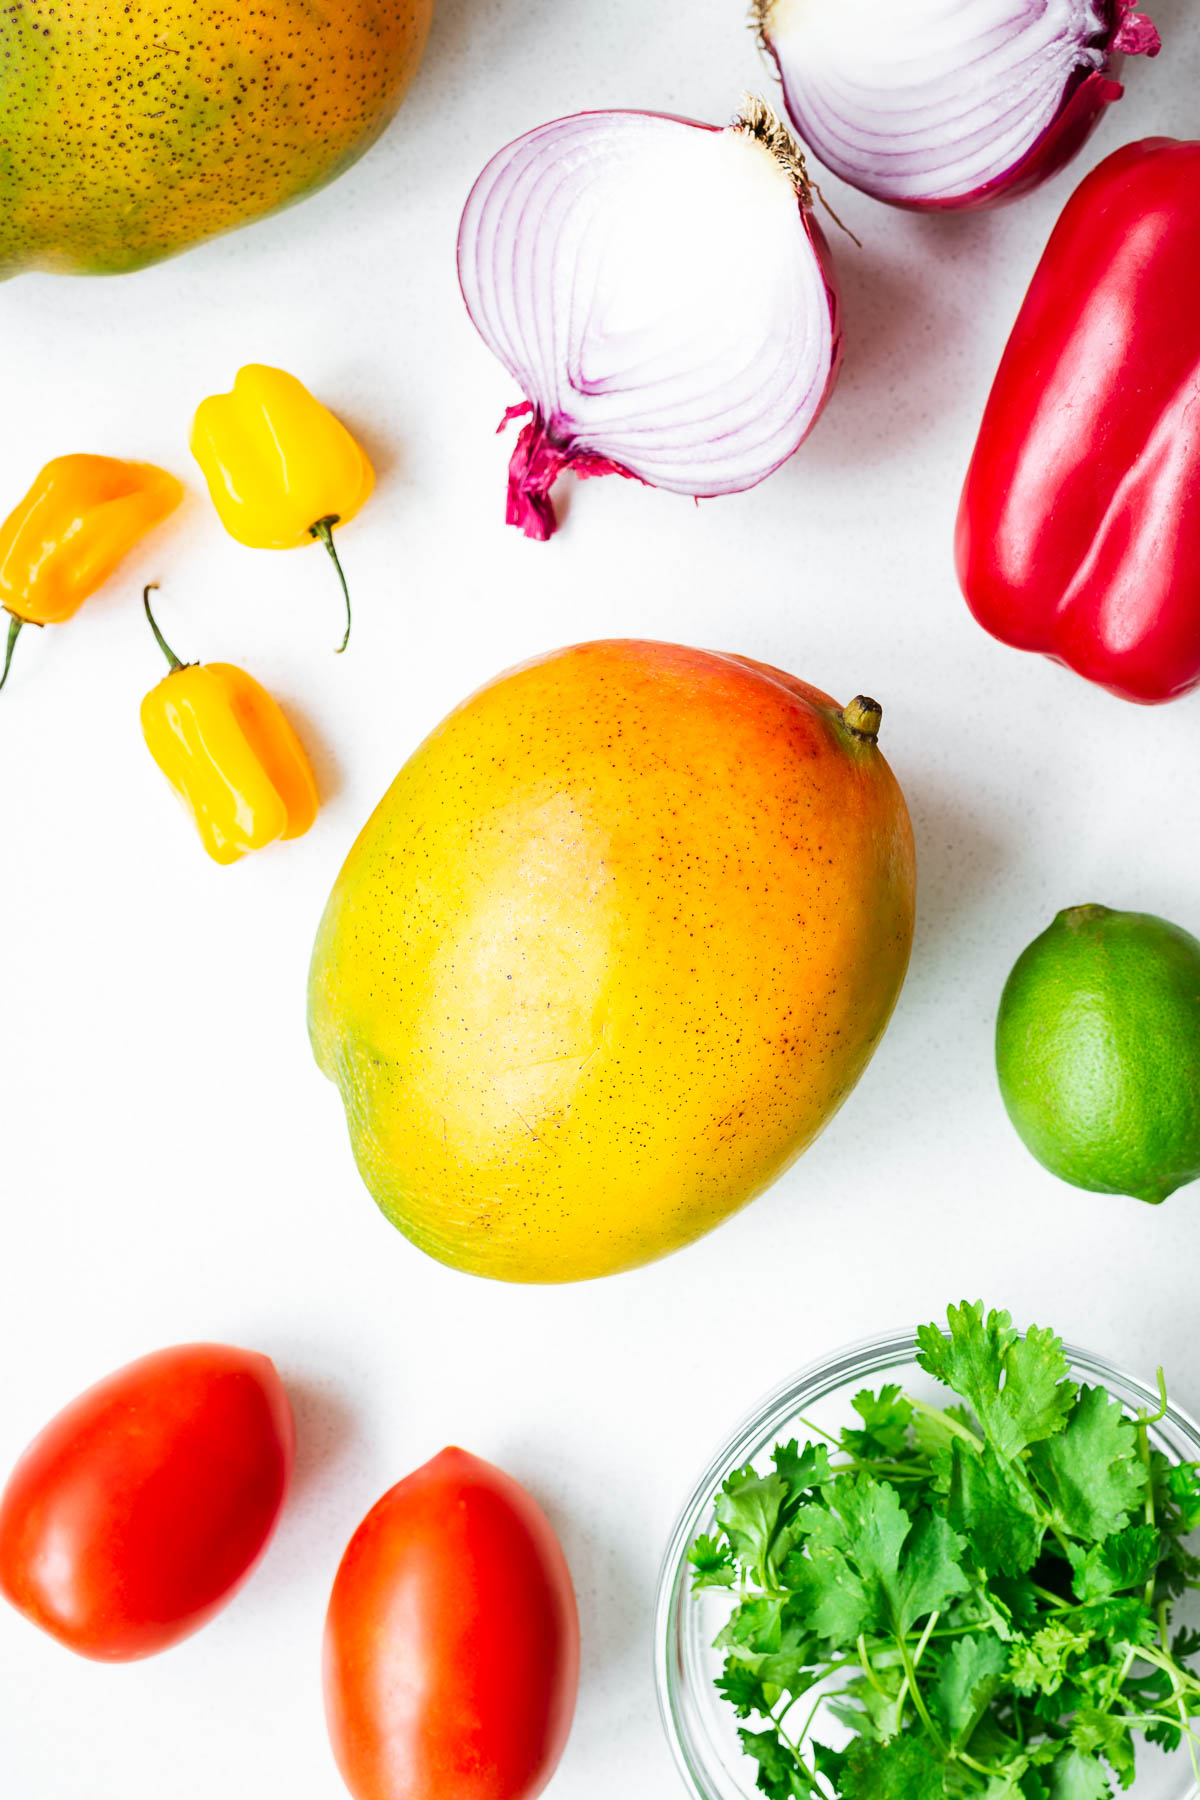 All the ingredients needed for mango habanero salsa (raw or roasted salsa). Ingredients include mango, tomatoes, lime, red bell pepper, red onion, habanero peppers and fresh cilantro leaves.